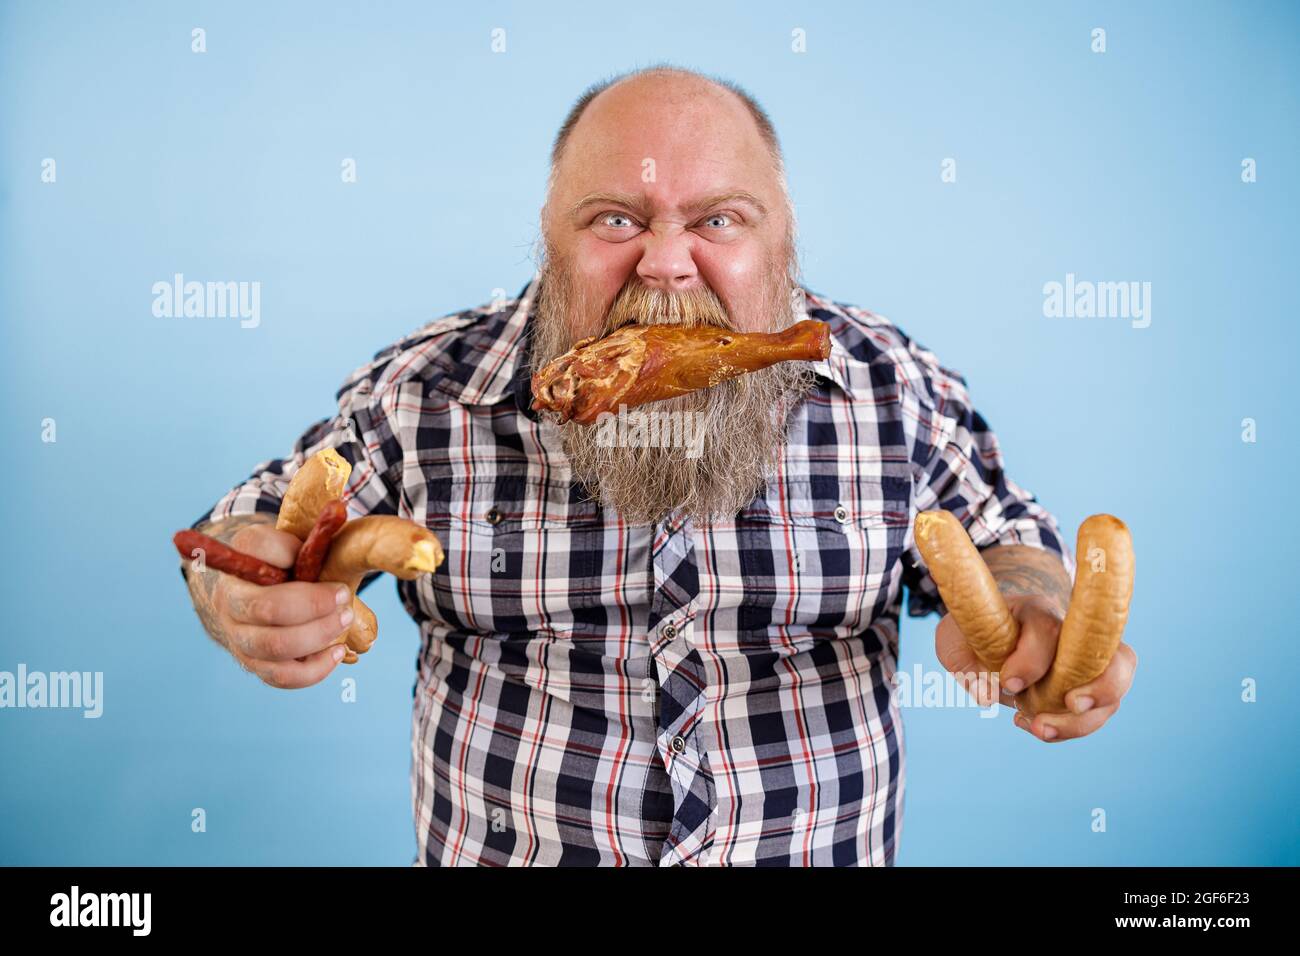 Greedy obese man holds chicken leg in teeth and bunches of sausages on blue background Stock Photo